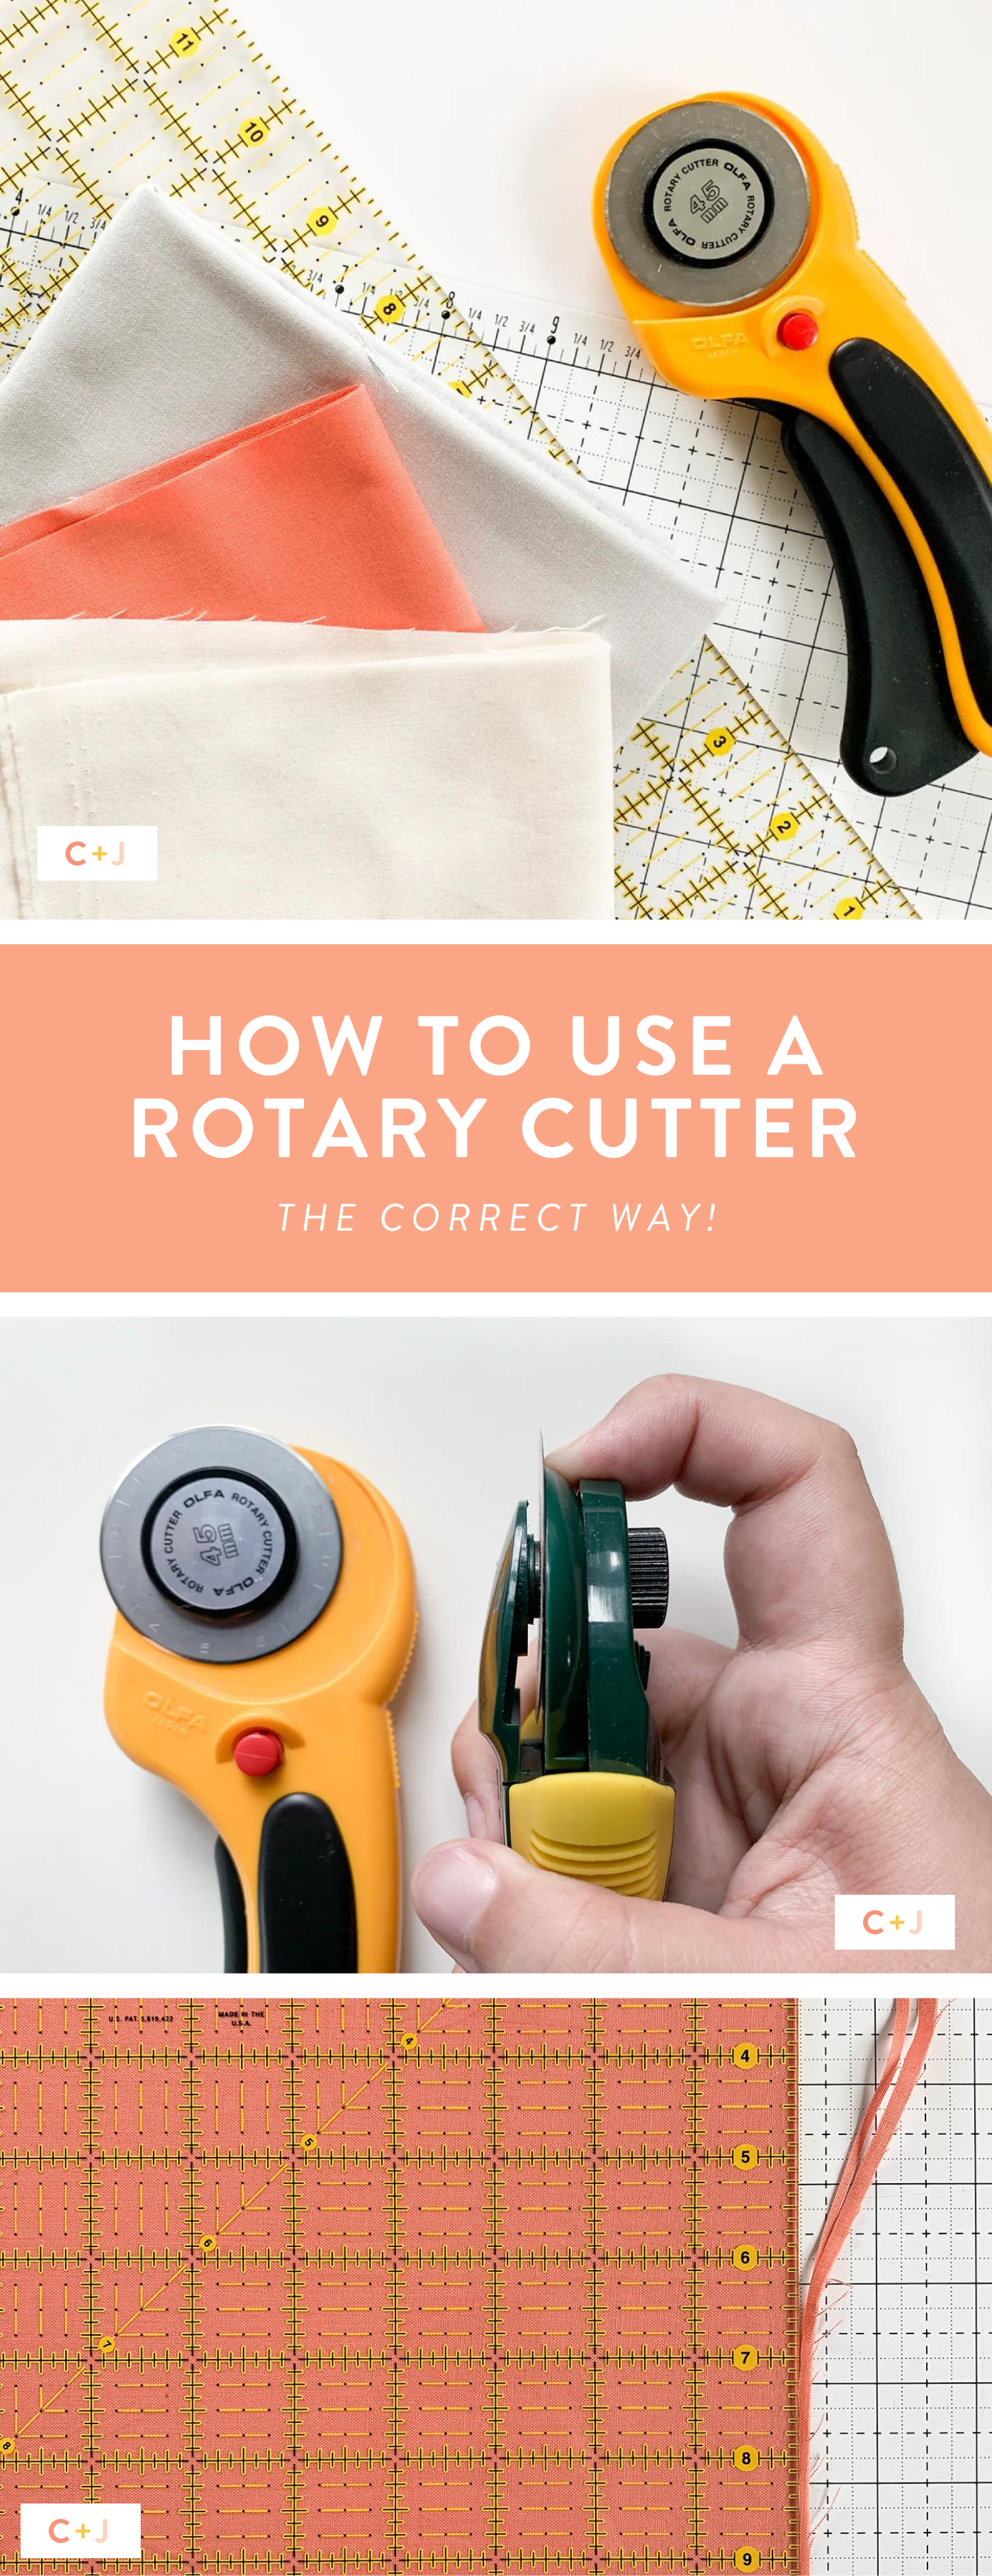 A beginner-friendly quilting tutorial for using a rotary cutter with essential tips for a seamless crafting experience.